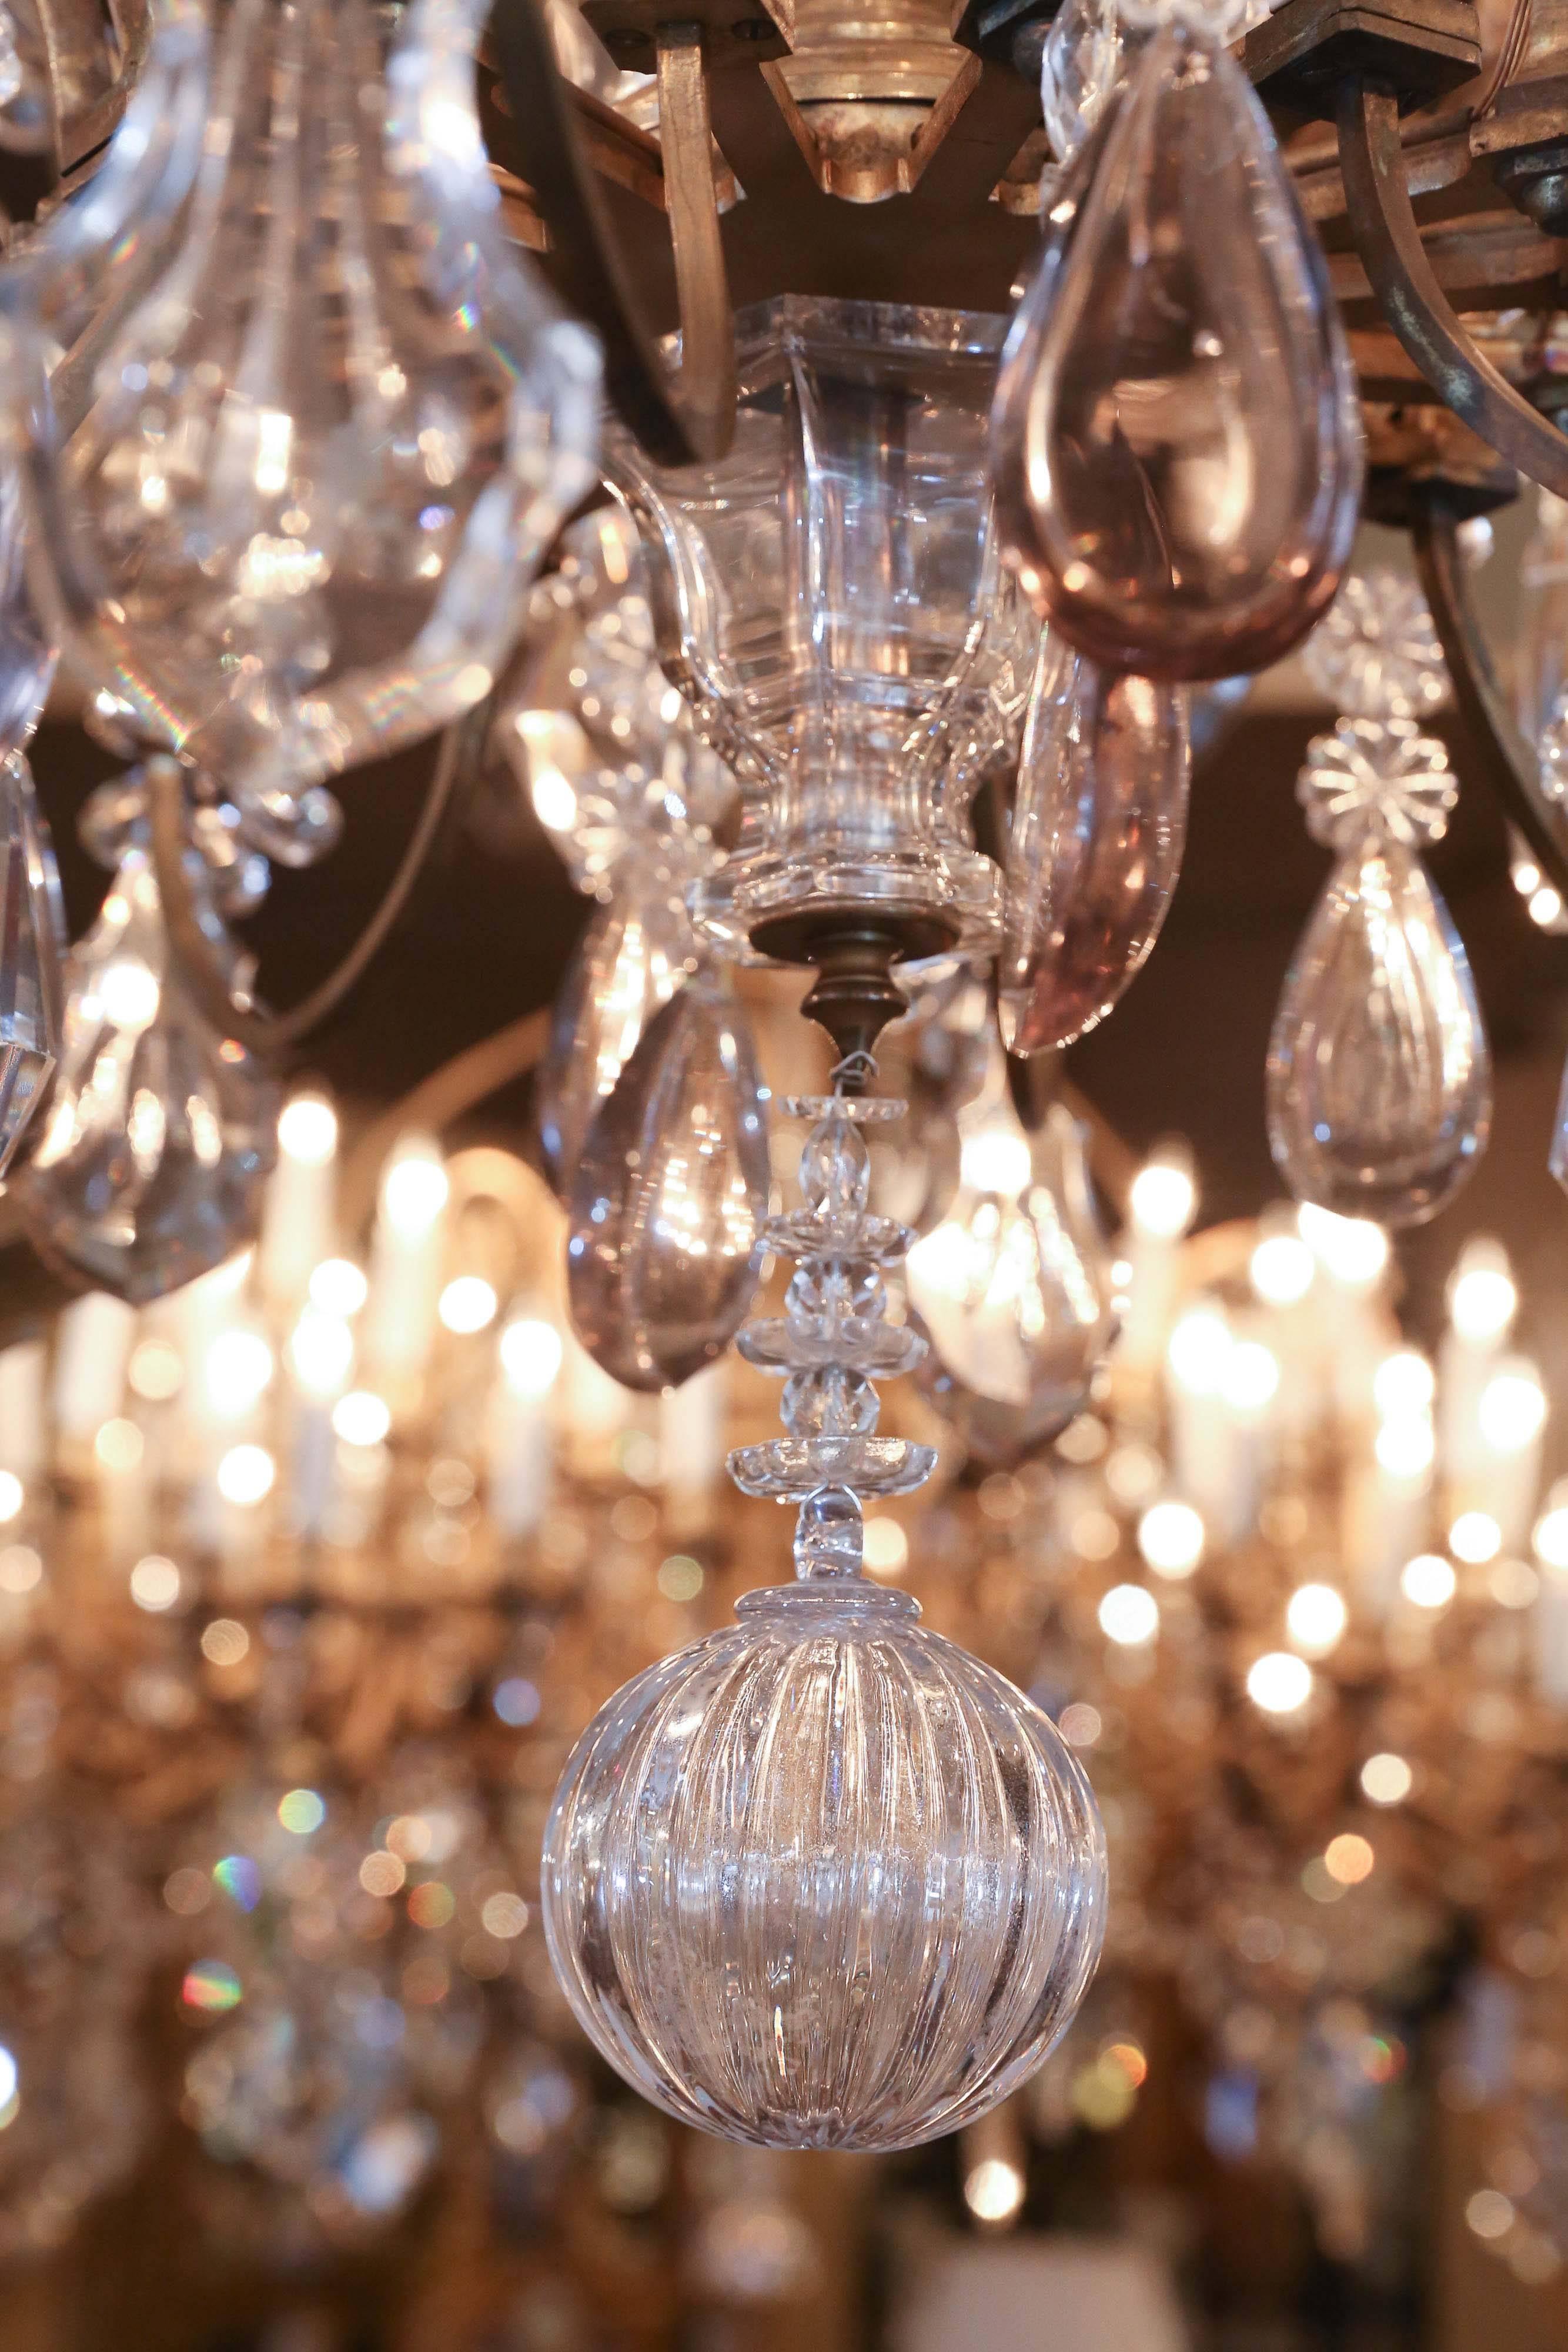 Elegant antique Baccarat chandelier with twenty eight lights. The scale is very grand with large opulent crystals 
 and tall spires. It has a mix of clear crystal with some crystal in 
Very pale lavender. The metal is a soft gilt bronze patina. The